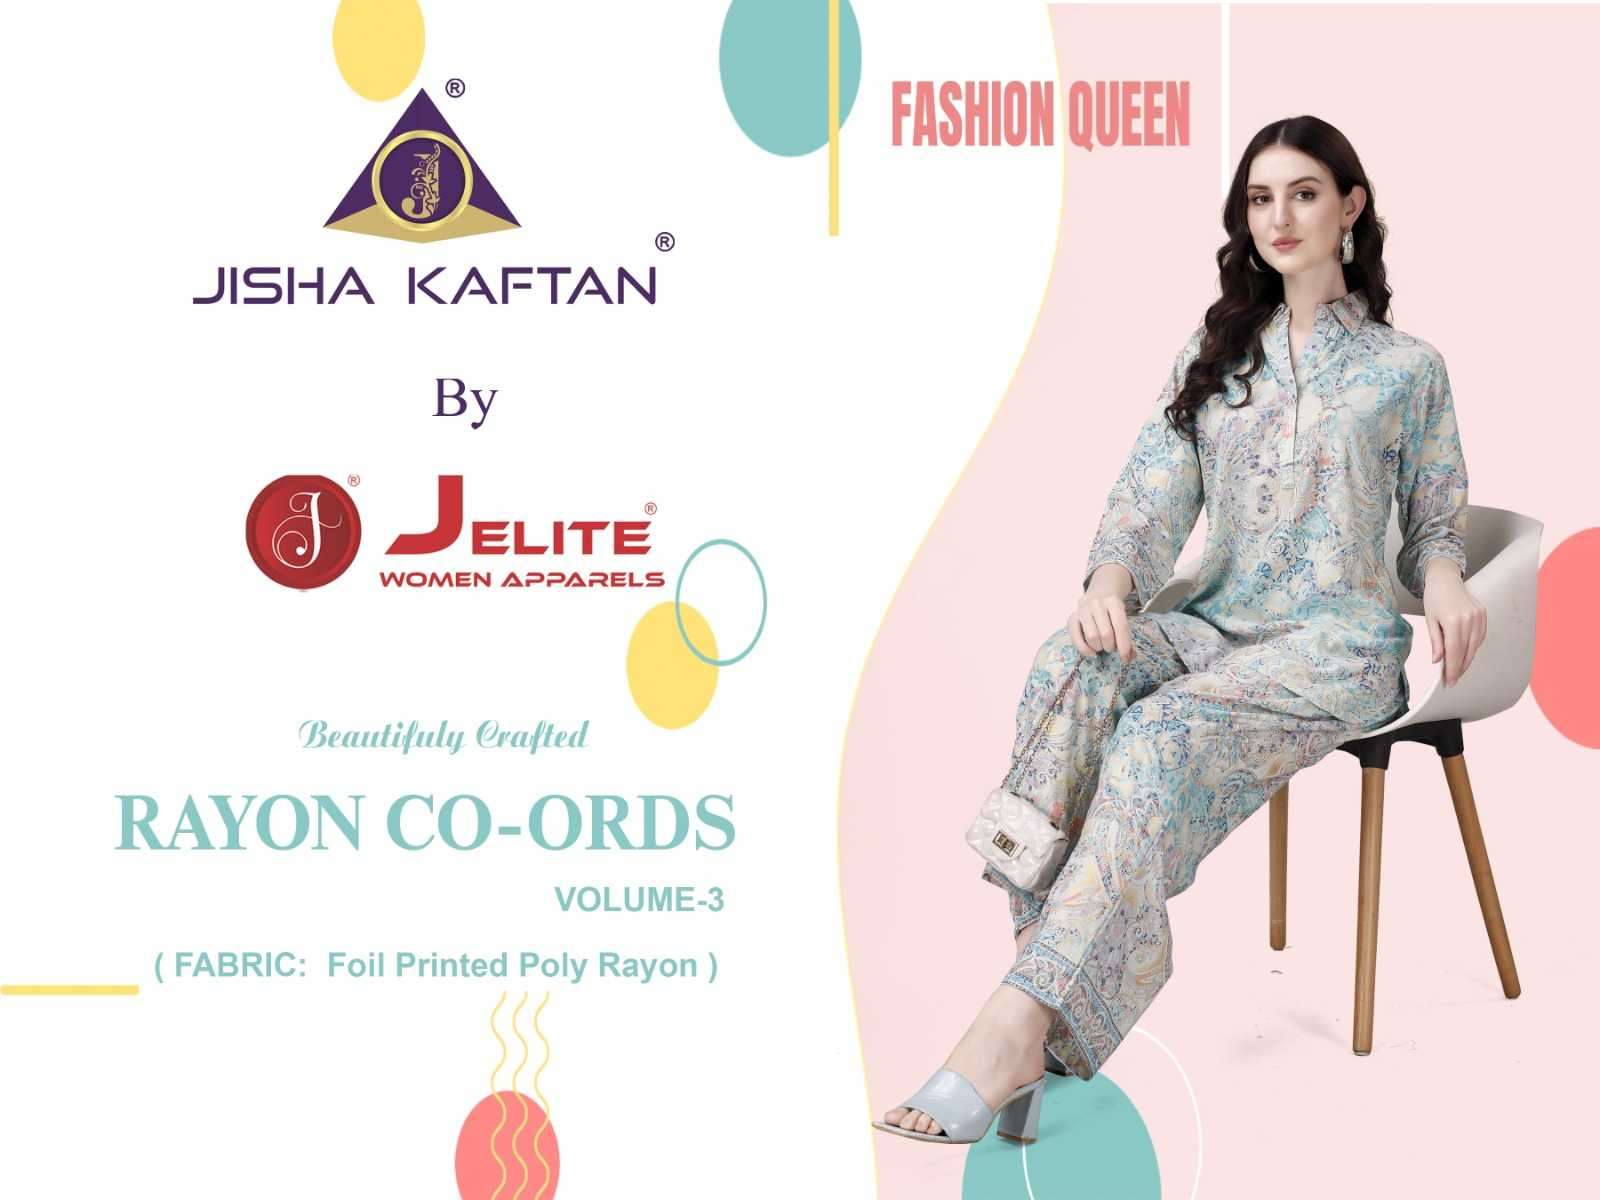 jelite co-ord sets vol 3 series 3061-3066 Rayon co-ord sets